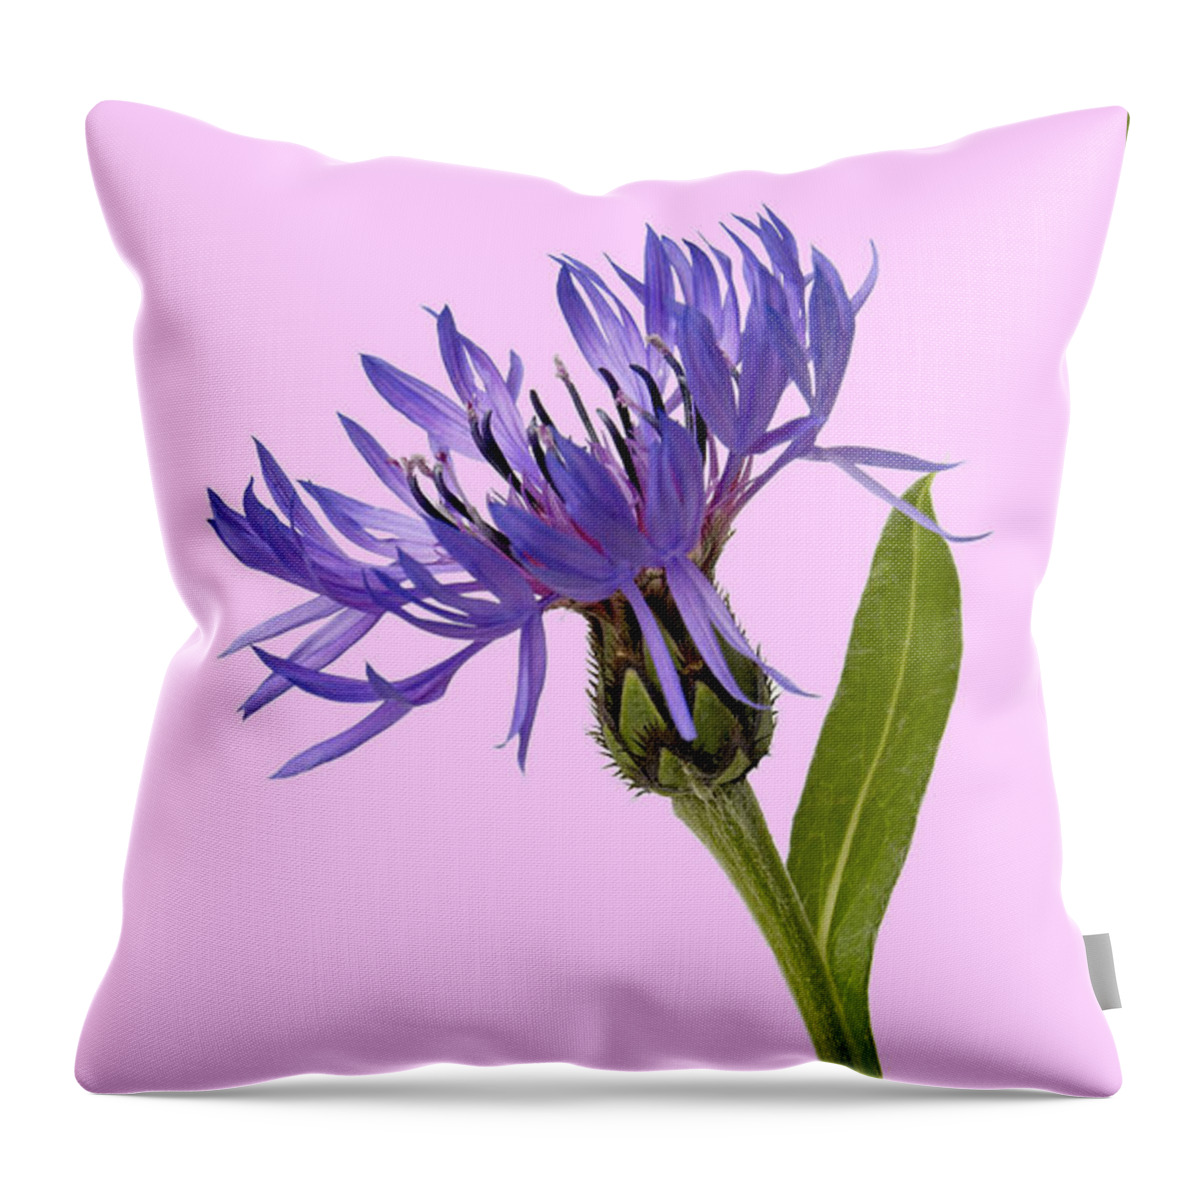 Flowers Flowers Throw Pillow featuring the photograph Flowers #5 by Tony Cordoza